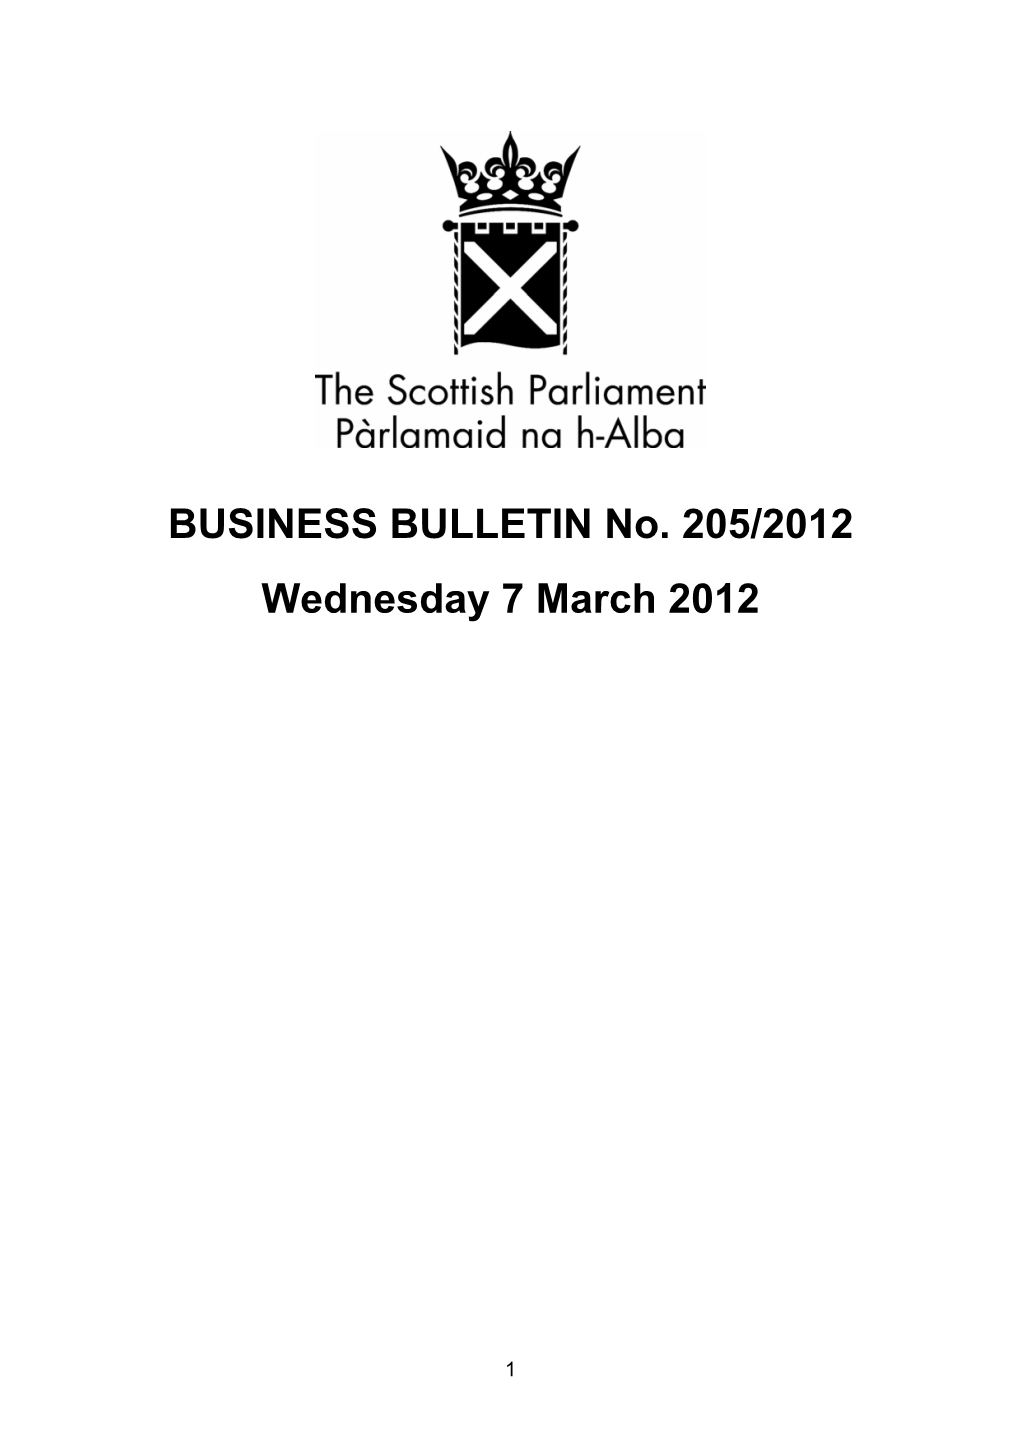 BUSINESS BULLETIN No. 205/2012 Wednesday 7 March 2012